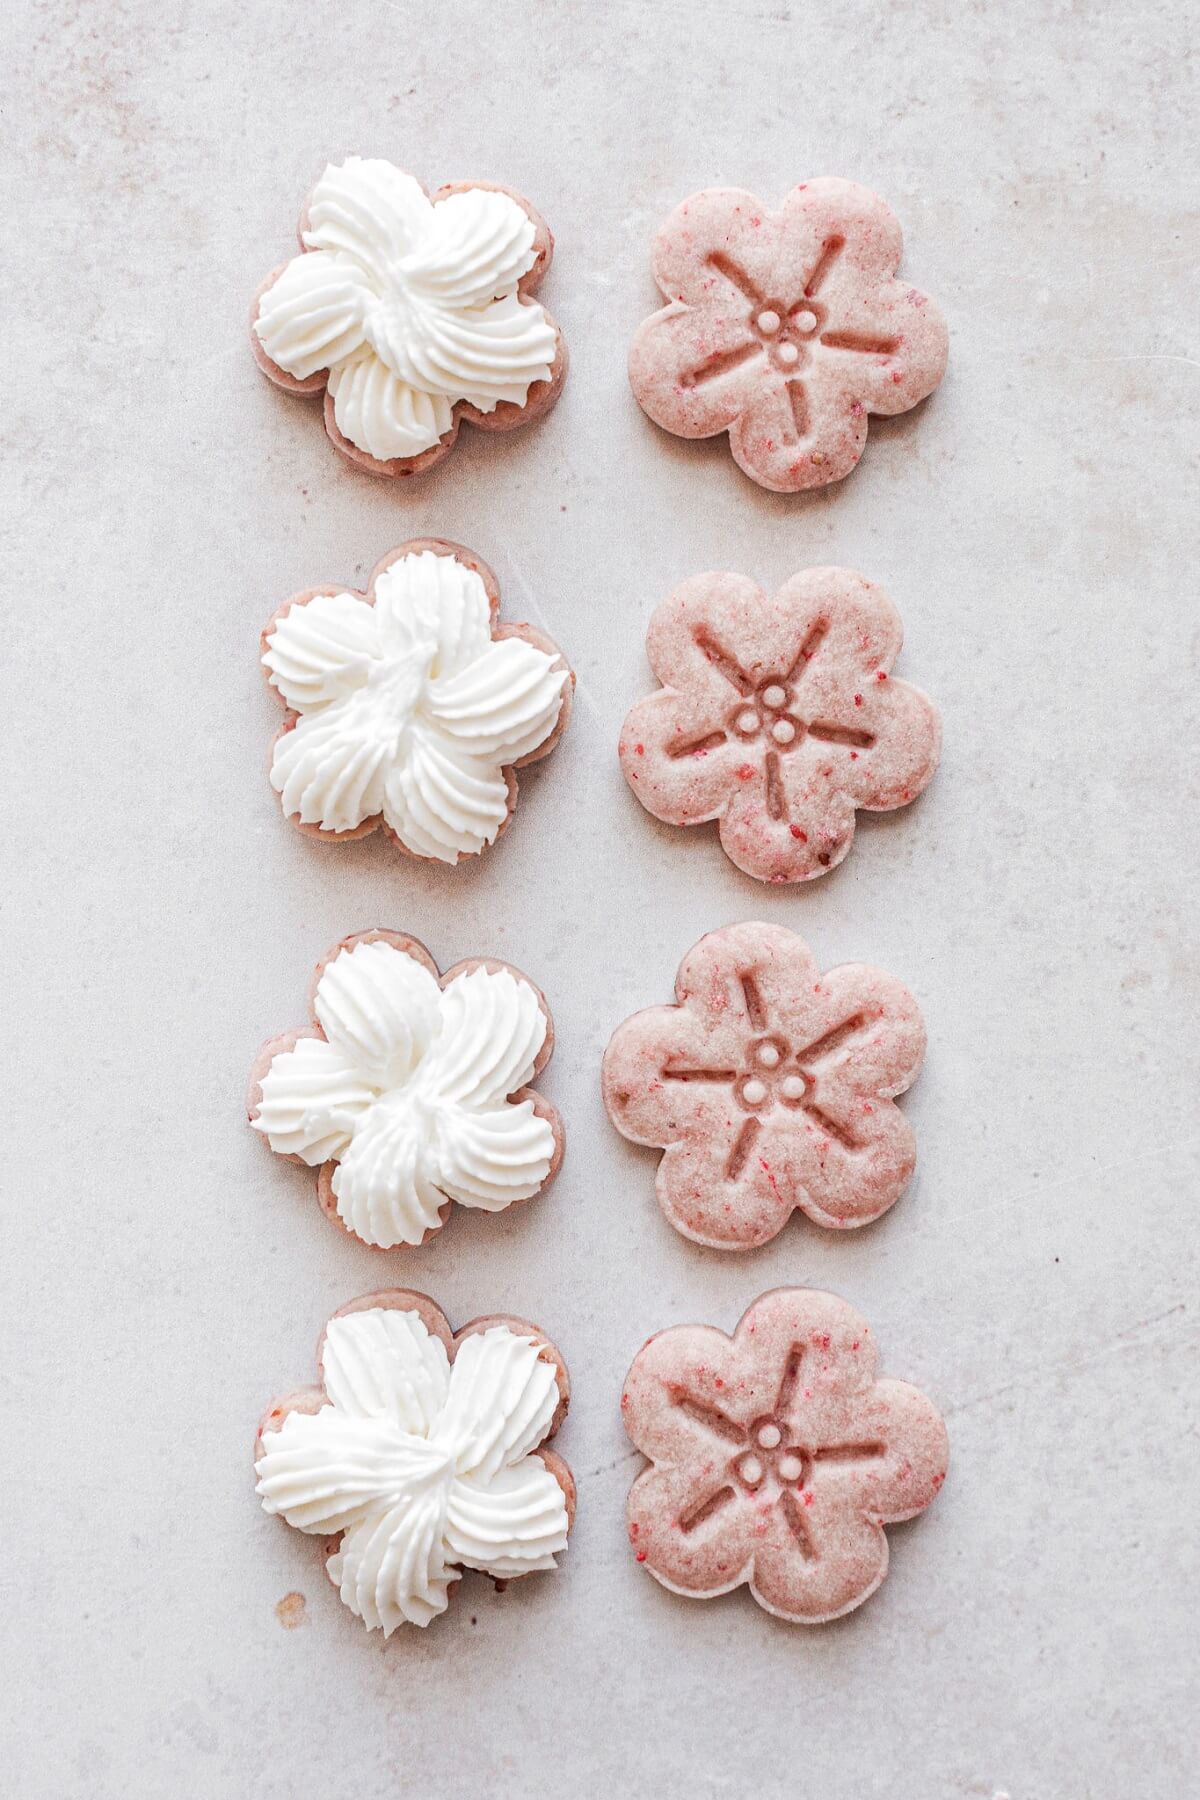 Flower shaped strawberry cookies filled with lemon buttercream.